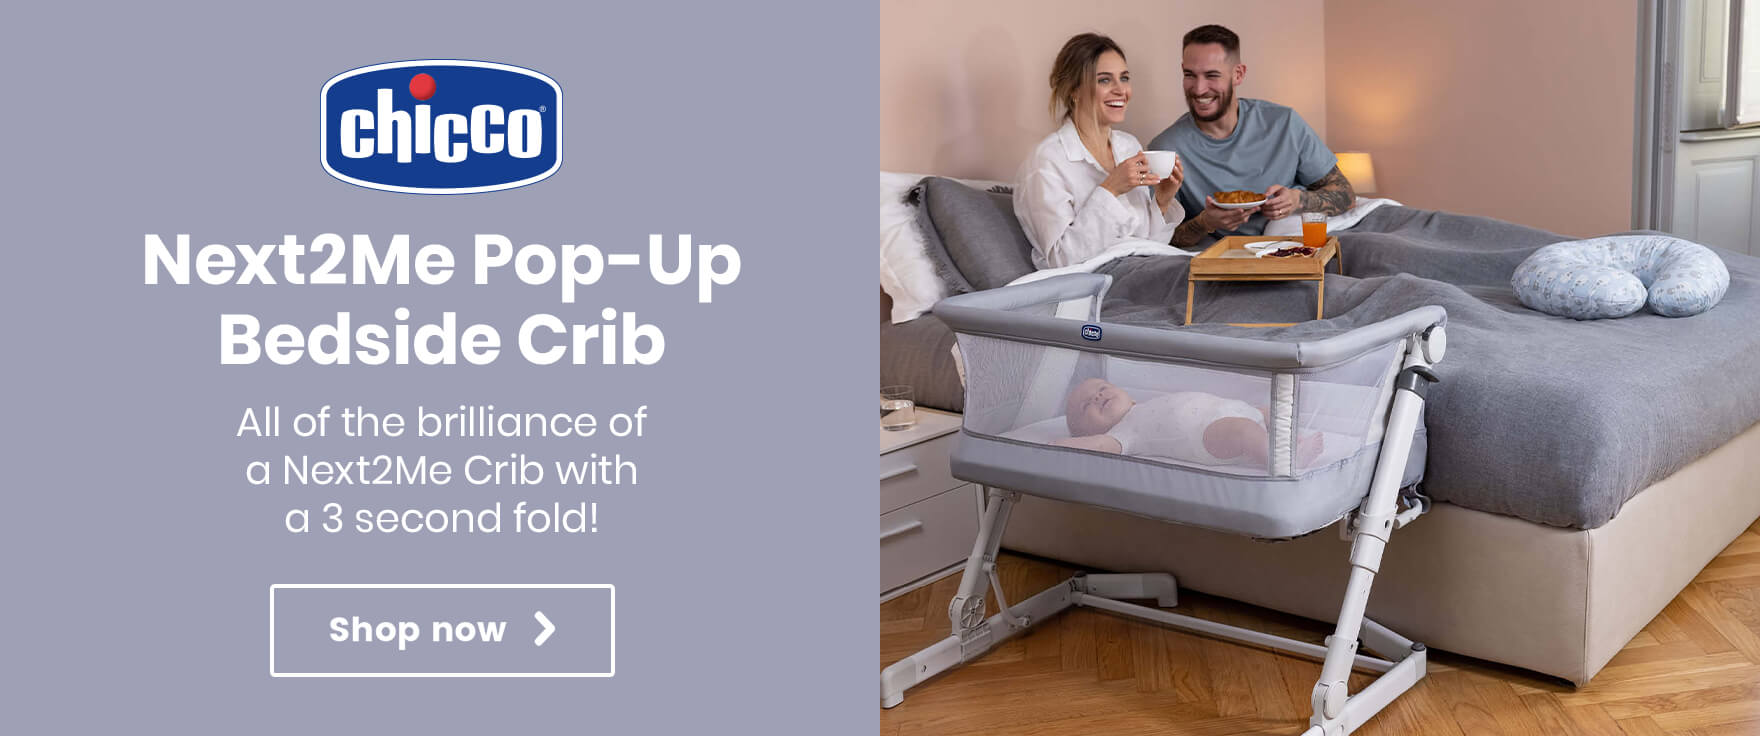 Chicco Next2Me Pop-Up Bedside Crib